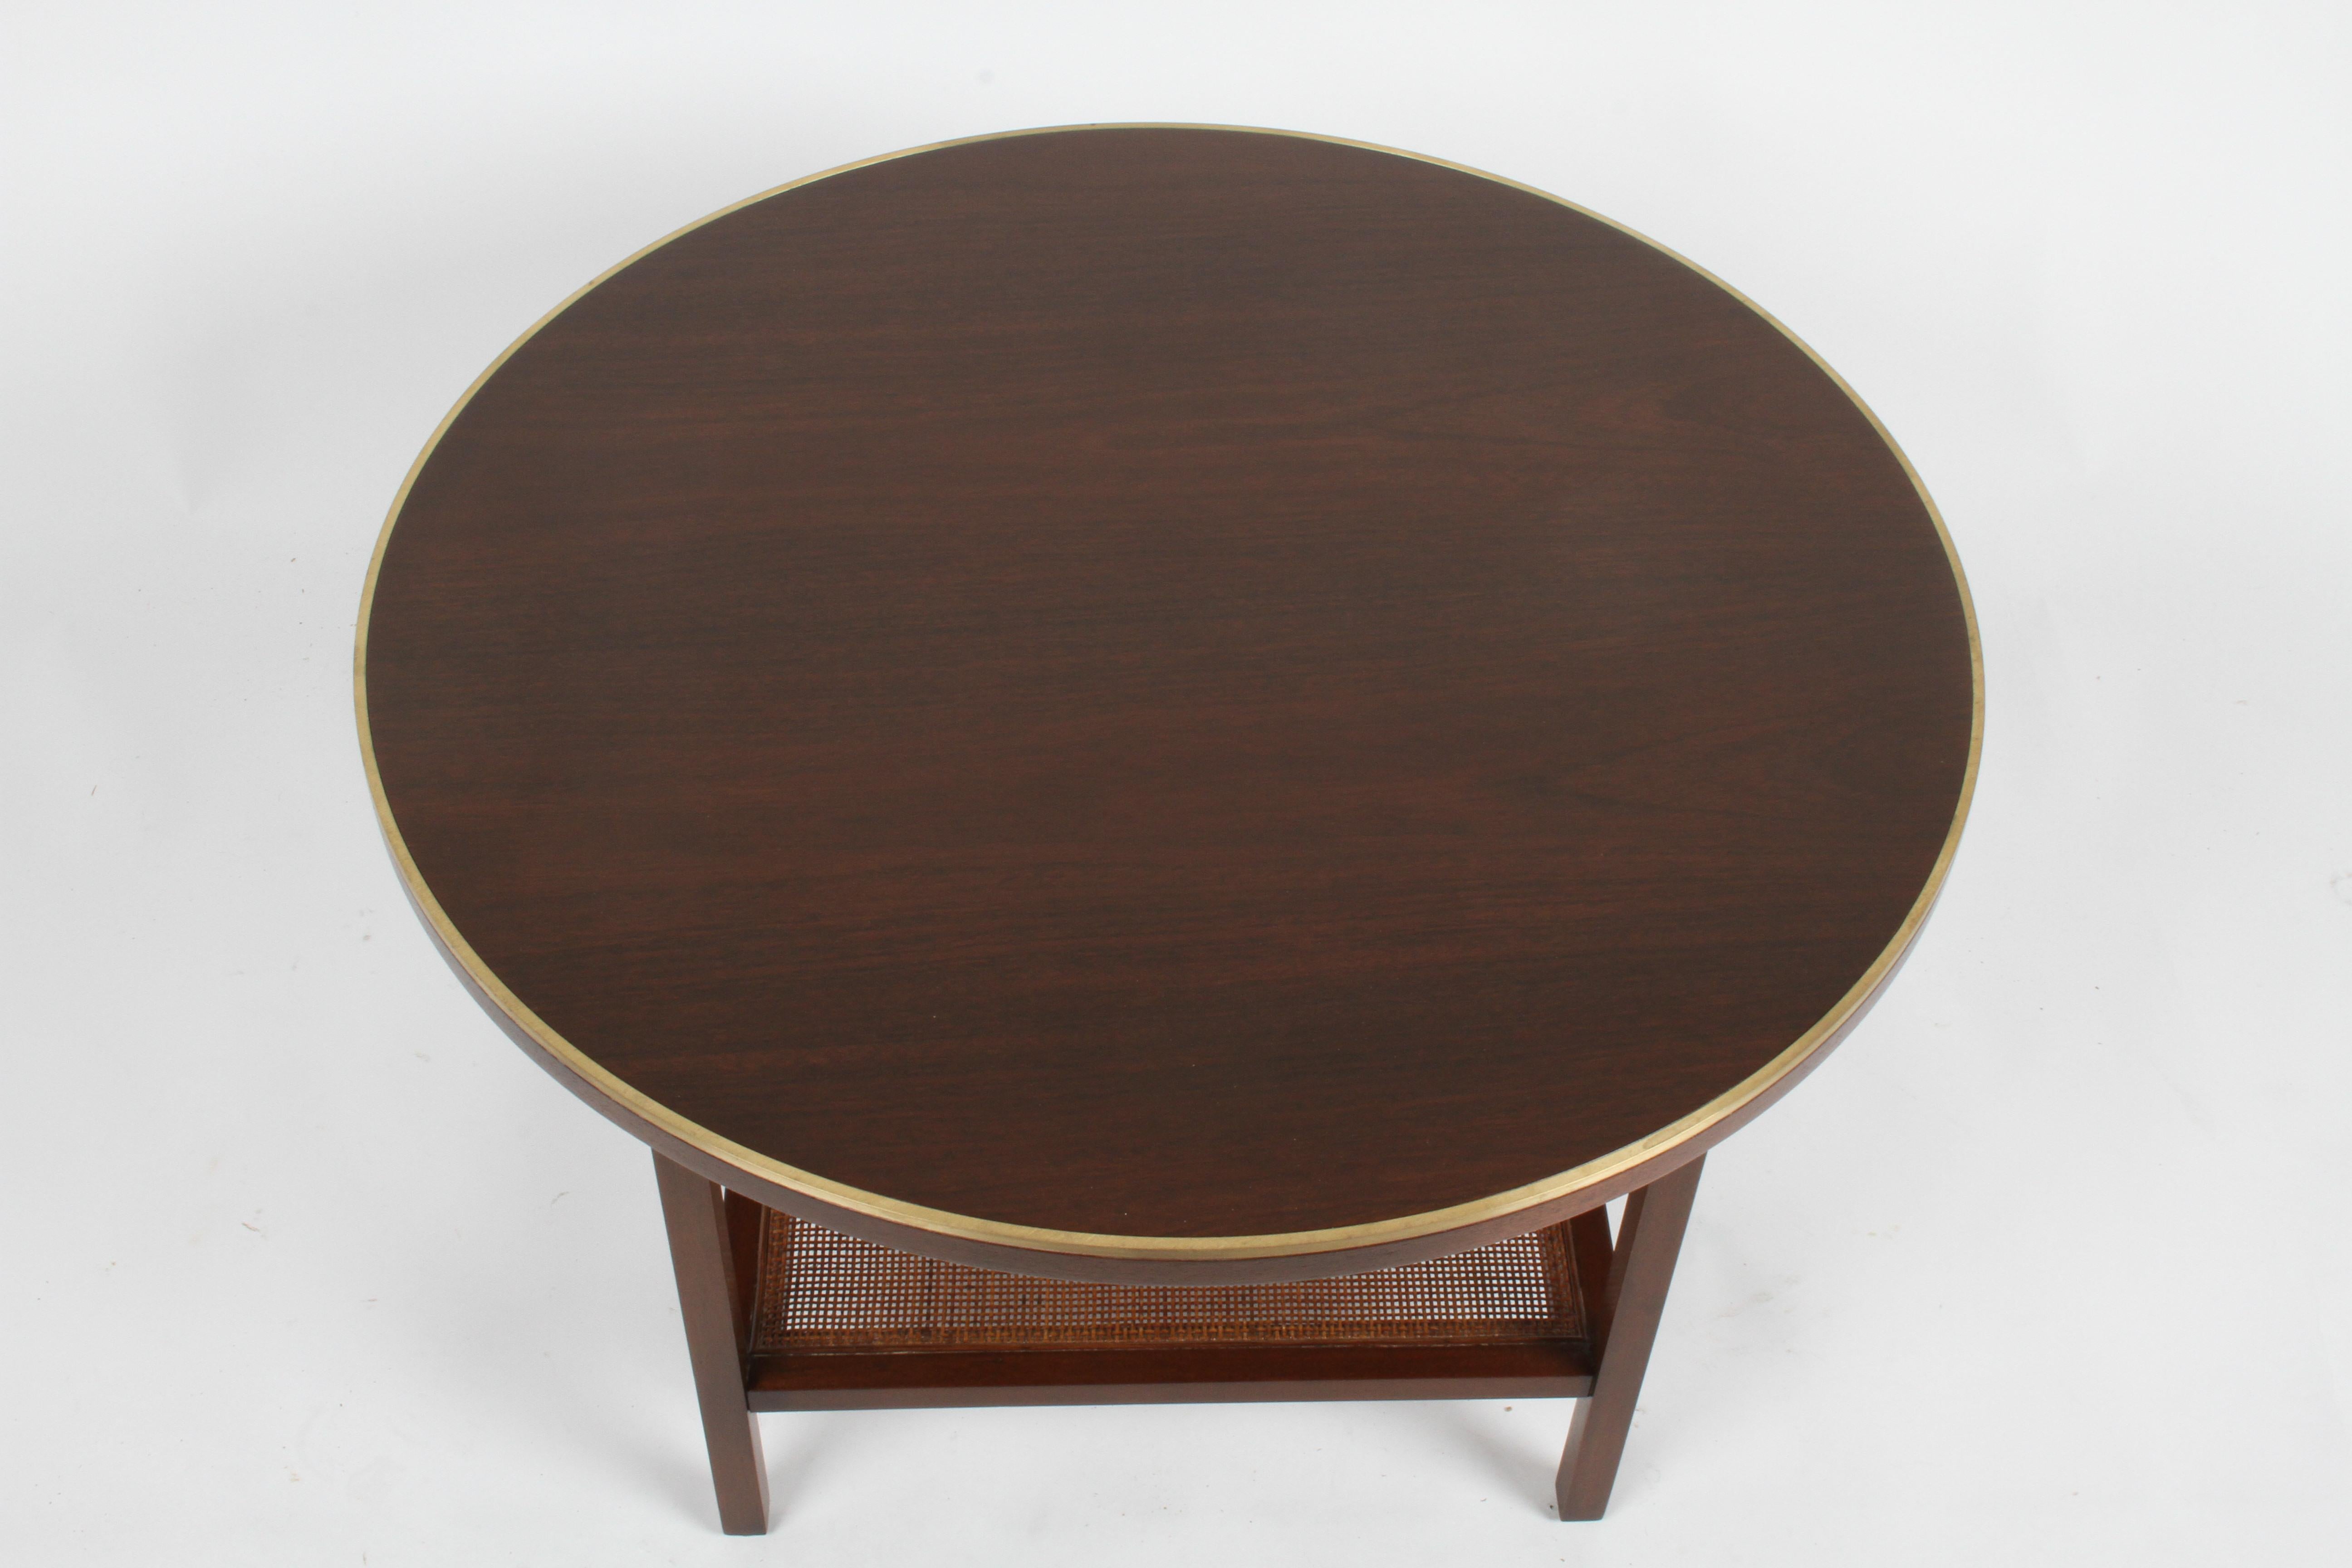 American Paul McCobb for Calvin Round Mahogany, Wicker with Brass Trim Side or End Table